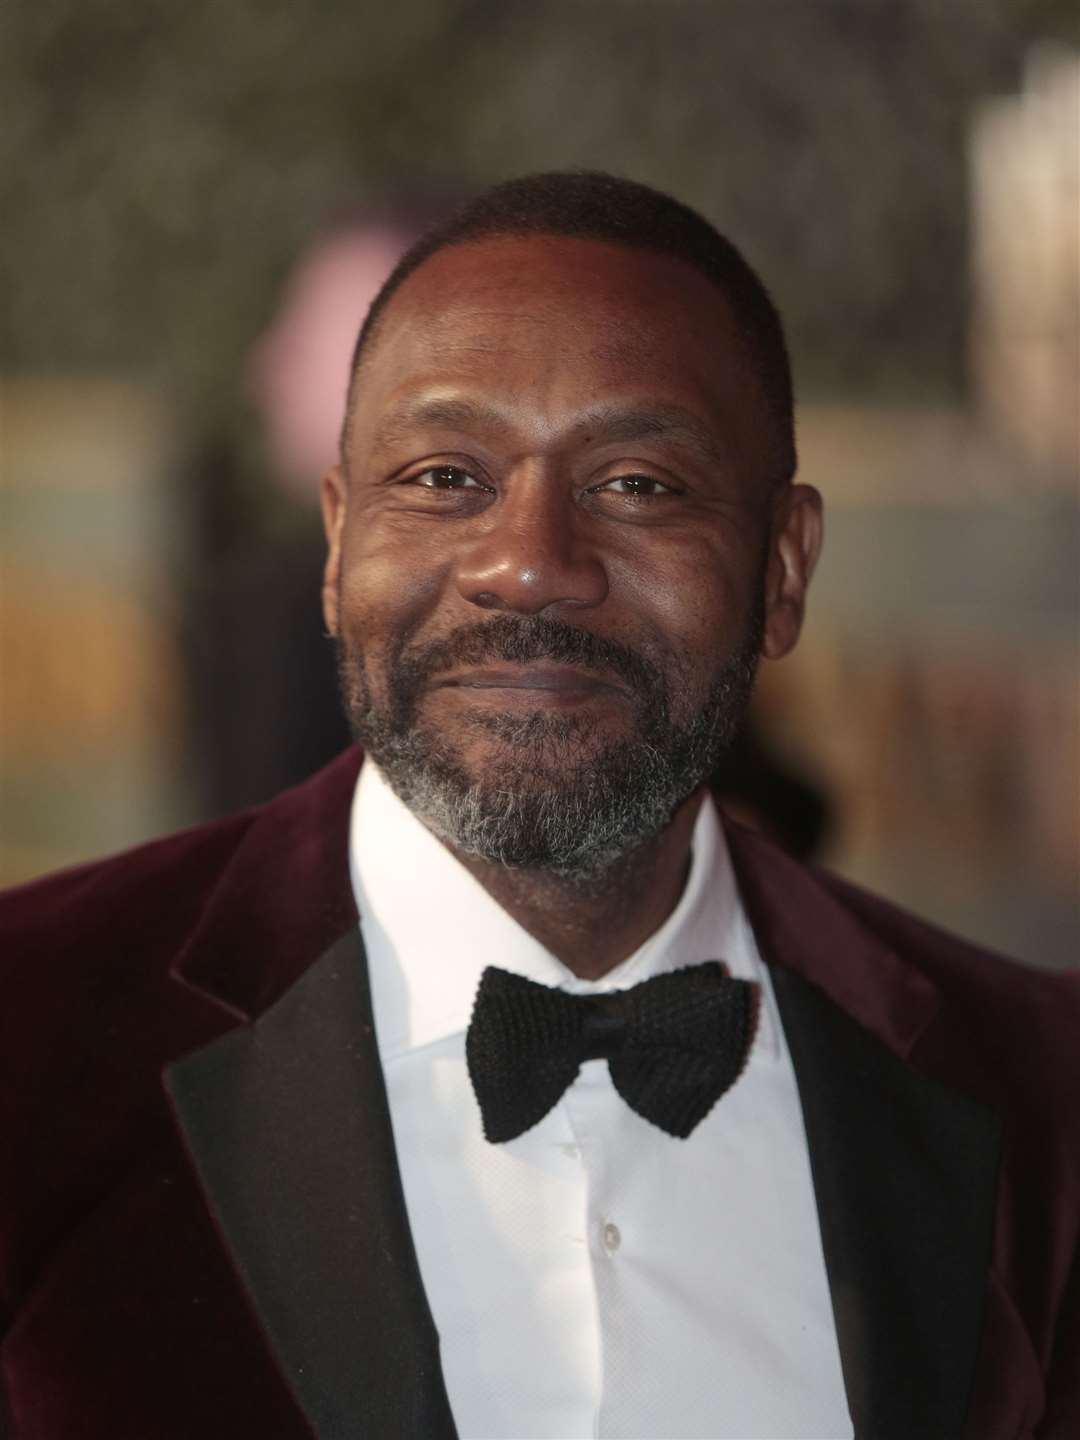 Sir Lenny Henry has written an open letter urging black Britons to get the Covid-19 vaccine.